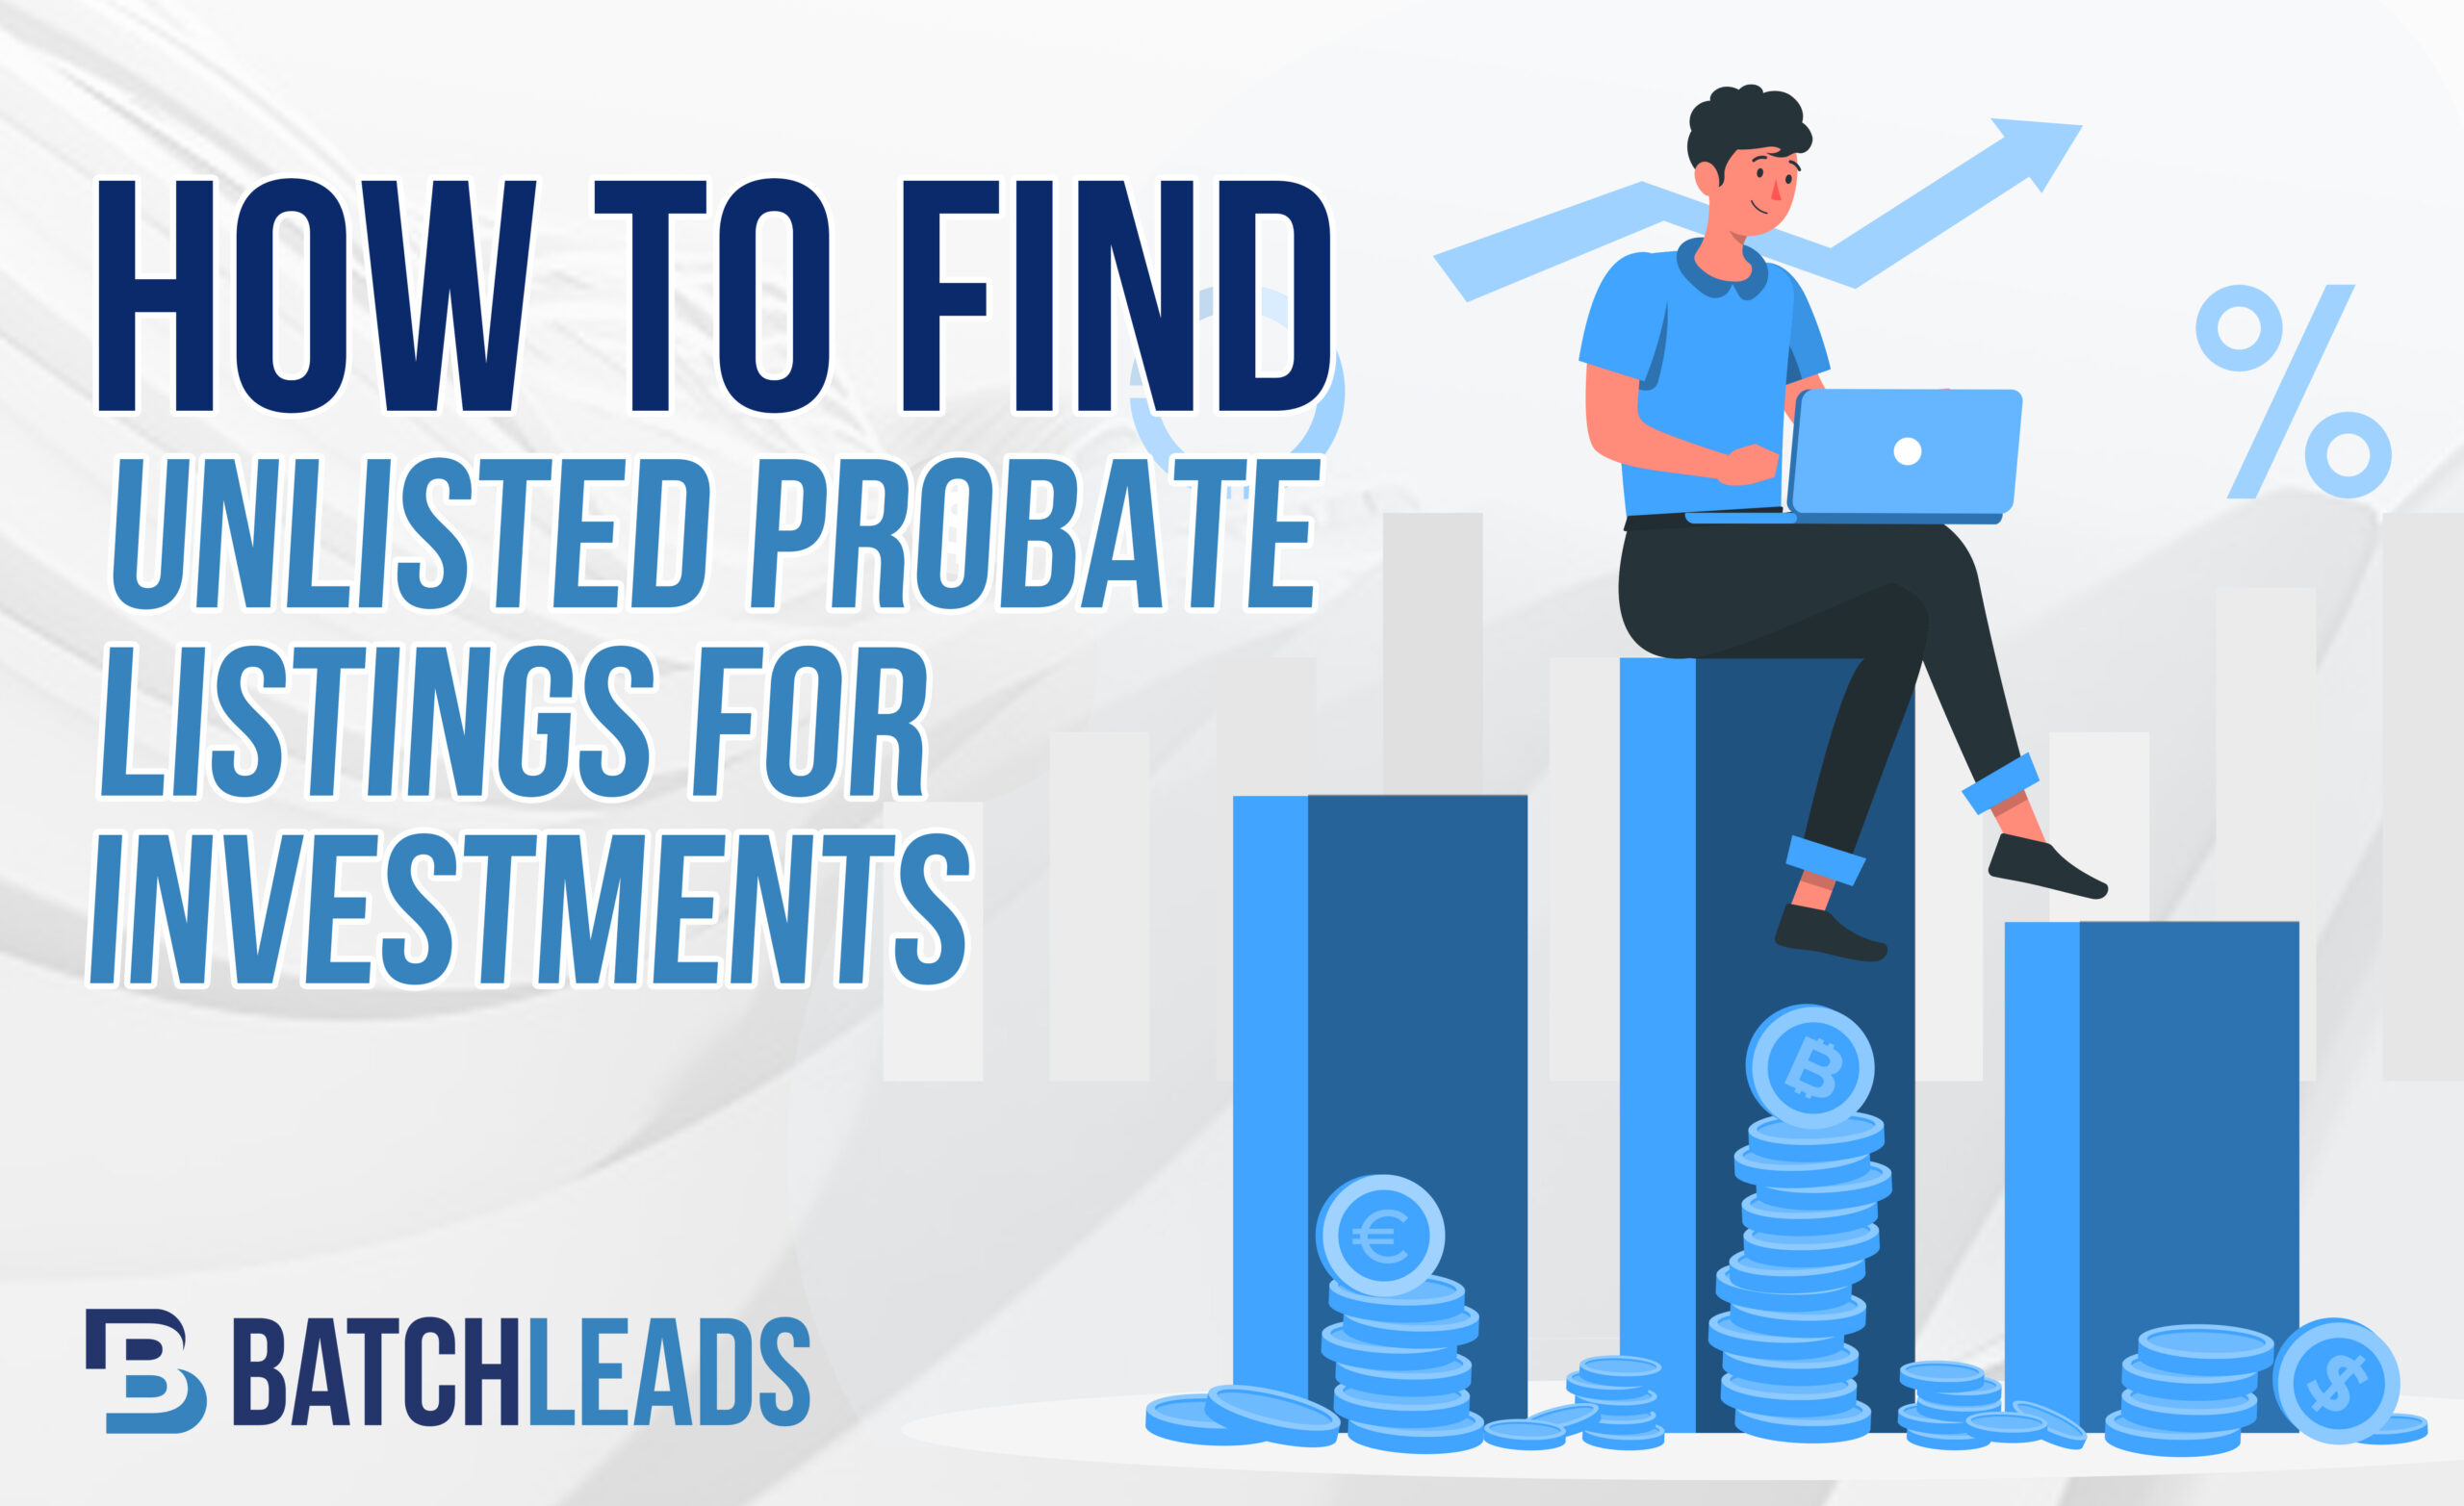 How To Find Unlisted Probate Listings For Investments